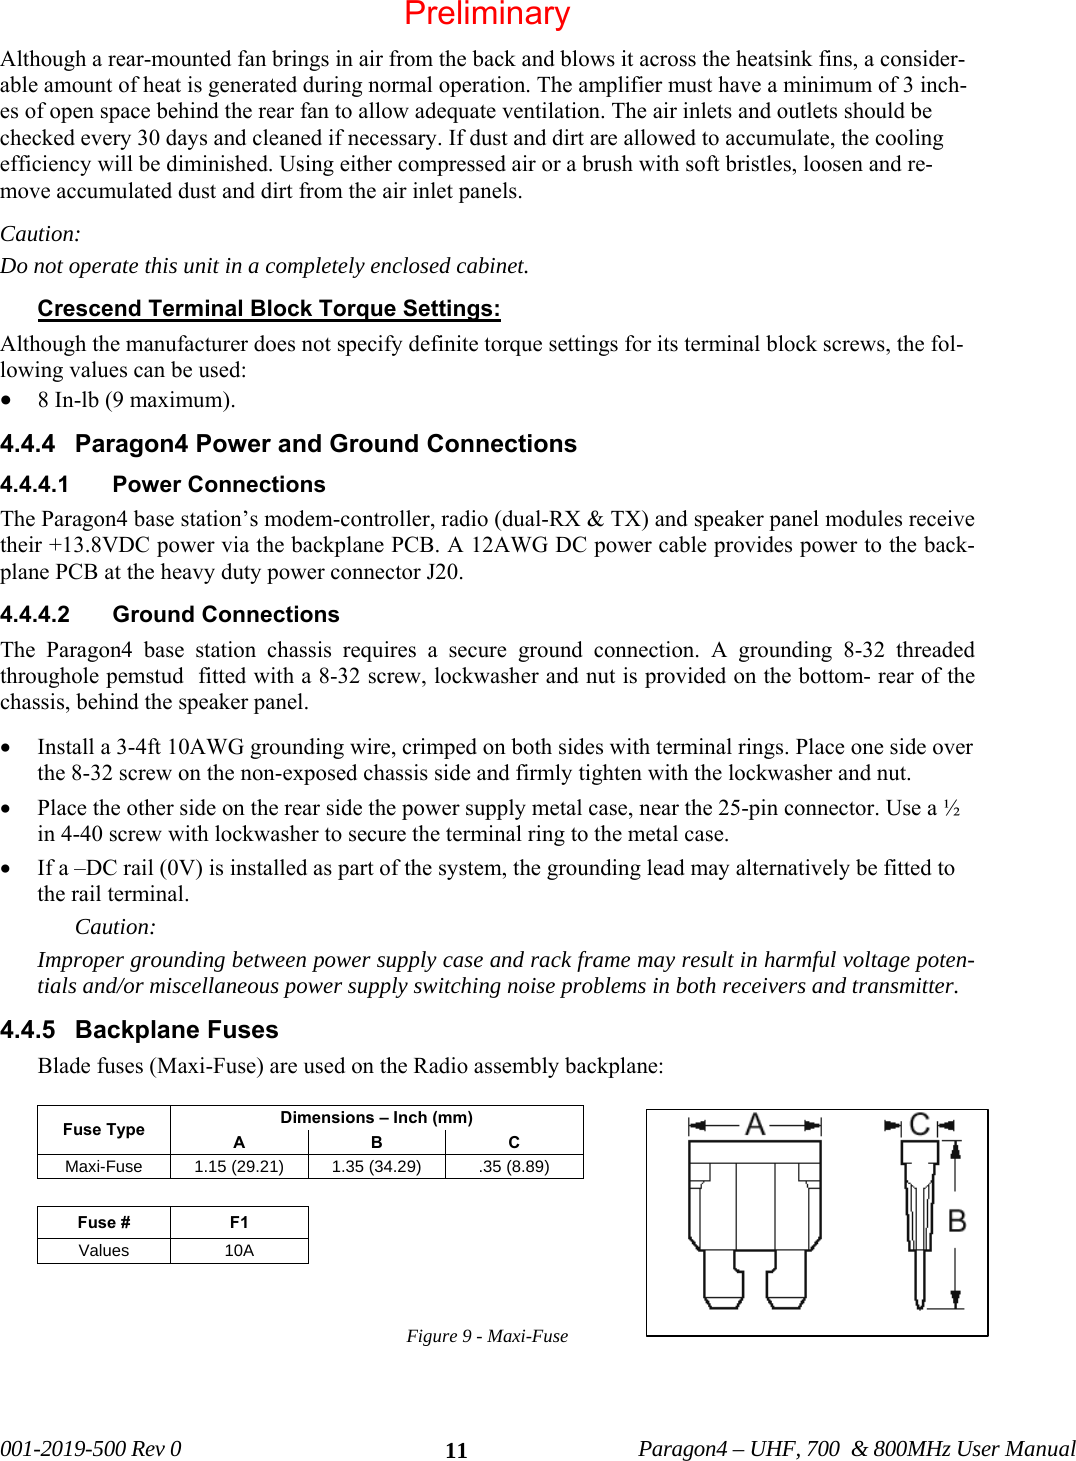   001-2019-500 Rev 0          Paragon4 – UHF, 700  &amp; 800MHz User Manual   11Although a rear-mounted fan brings in air from the back and blows it across the heatsink fins, a consider-able amount of heat is generated during normal operation. The amplifier must have a minimum of 3 inch-es of open space behind the rear fan to allow adequate ventilation. The air inlets and outlets should be checked every 30 days and cleaned if necessary. If dust and dirt are allowed to accumulate, the cooling efficiency will be diminished. Using either compressed air or a brush with soft bristles, loosen and re-move accumulated dust and dirt from the air inlet panels. Caution:  Do not operate this unit in a completely enclosed cabinet. Crescend Terminal Block Torque Settings:  Although the manufacturer does not specify definite torque settings for its terminal block screws, the fol-lowing values can be used: • 8 In-lb (9 maximum).  4.4.4  Paragon4 Power and Ground Connections 4.4.4.1  Power Connections  The Paragon4 base station’s modem-controller, radio (dual-RX &amp; TX) and speaker panel modules receive their +13.8VDC power via the backplane PCB. A 12AWG DC power cable provides power to the back-plane PCB at the heavy duty power connector J20.     4.4.4.2  Ground Connections  The Paragon4 base station chassis requires a secure ground connection. A grounding 8-32 threaded throughole pemstud  fitted with a 8-32 screw, lockwasher and nut is provided on the bottom- rear of the chassis, behind the speaker panel.  • Install a 3-4ft 10AWG grounding wire, crimped on both sides with terminal rings. Place one side over the 8-32 screw on the non-exposed chassis side and firmly tighten with the lockwasher and nut.  • Place the other side on the rear side the power supply metal case, near the 25-pin connector. Use a ½ in 4-40 screw with lockwasher to secure the terminal ring to the metal case.  • If a –DC rail (0V) is installed as part of the system, the grounding lead may alternatively be fitted to the rail terminal. Caution: Improper grounding between power supply case and rack frame may result in harmful voltage poten-tials and/or miscellaneous power supply switching noise problems in both receivers and transmitter. 4.4.5 Backplane Fuses Blade fuses (Maxi-Fuse) are used on the Radio assembly backplane:  Fuse Type  Dimensions – Inch (mm) A B C Maxi-Fuse  1.15 (29.21)  1.35 (34.29)  .35 (8.89)  Fuse #  F1 Values 10A   Figure 9 - Maxi-Fuse    Preliminary